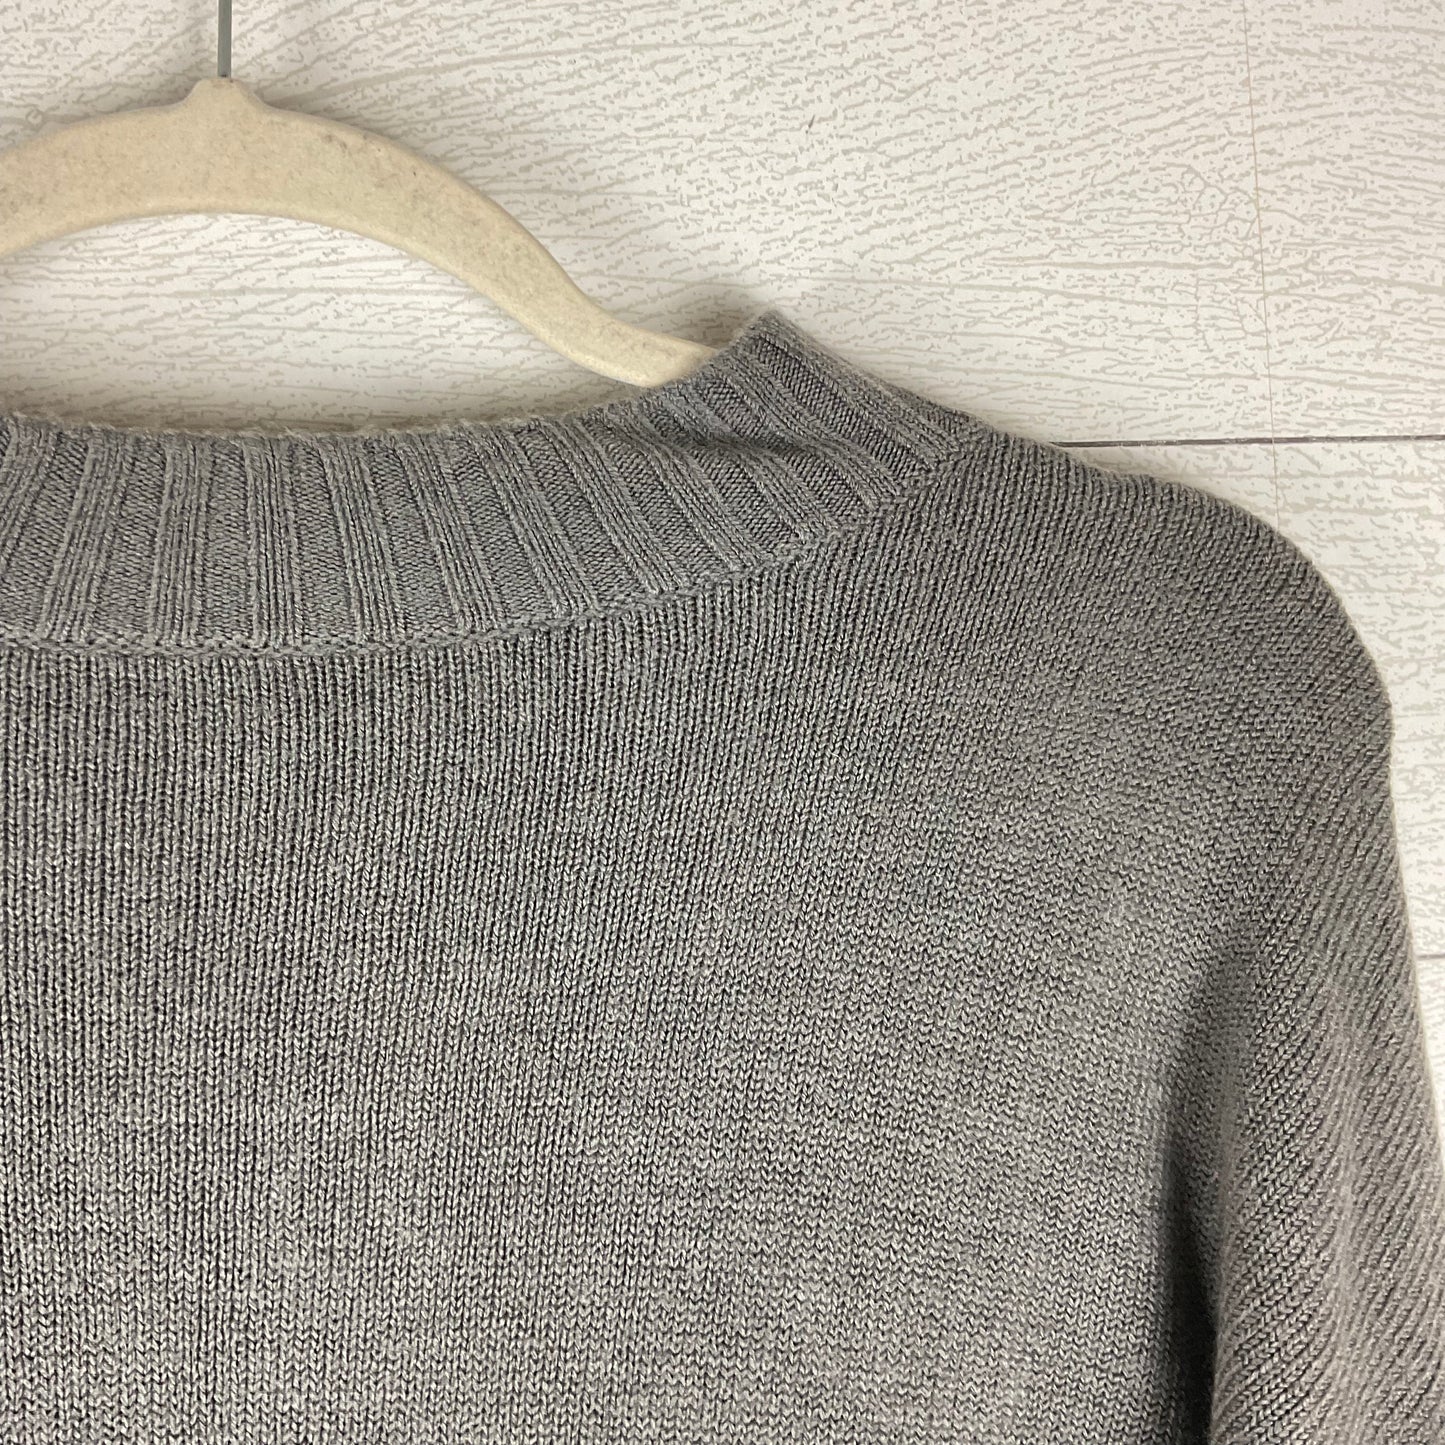 Sweater By One A  Size: 2x